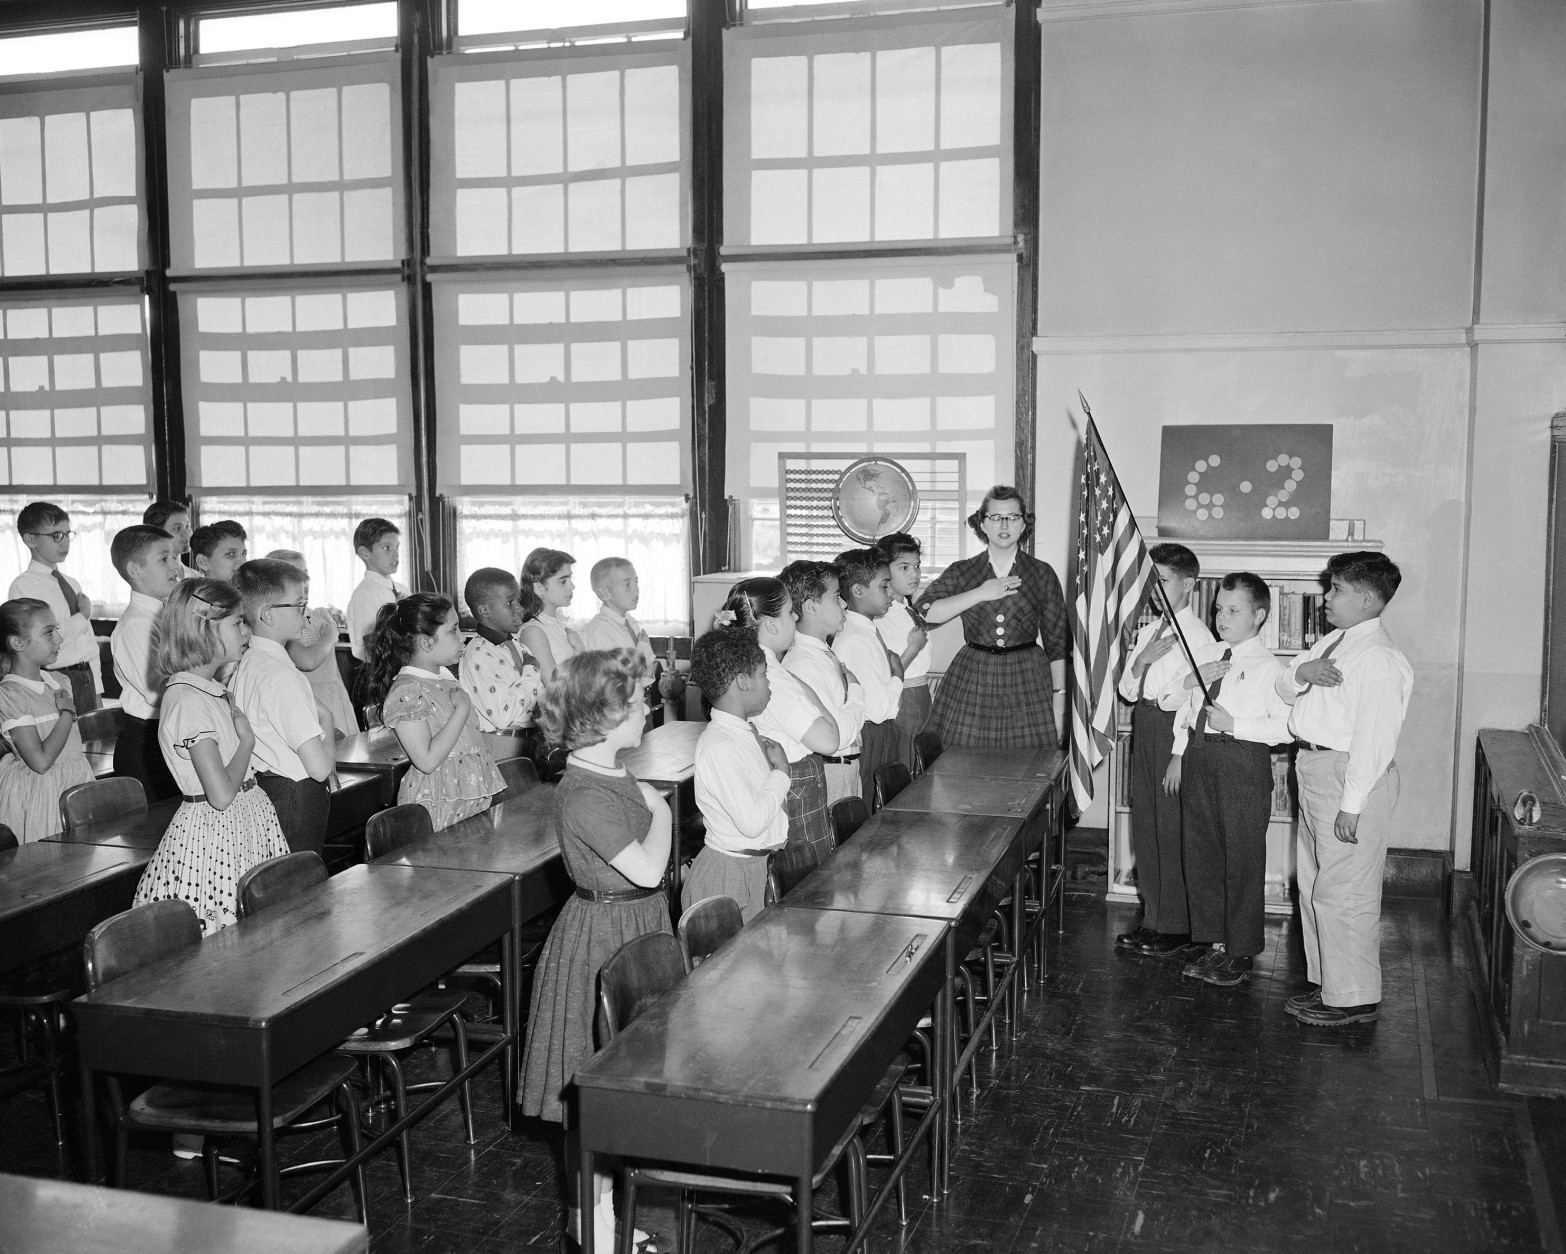 Holding the hand over the heart is the salute to the flag used in New York public schools. The old type military salute has been discontinued by a law passed in 1942.  This is a sixth grade class in P.S. 116 at 33rd street in Manhattan, Oct. 11, 1957. (AP Photo)